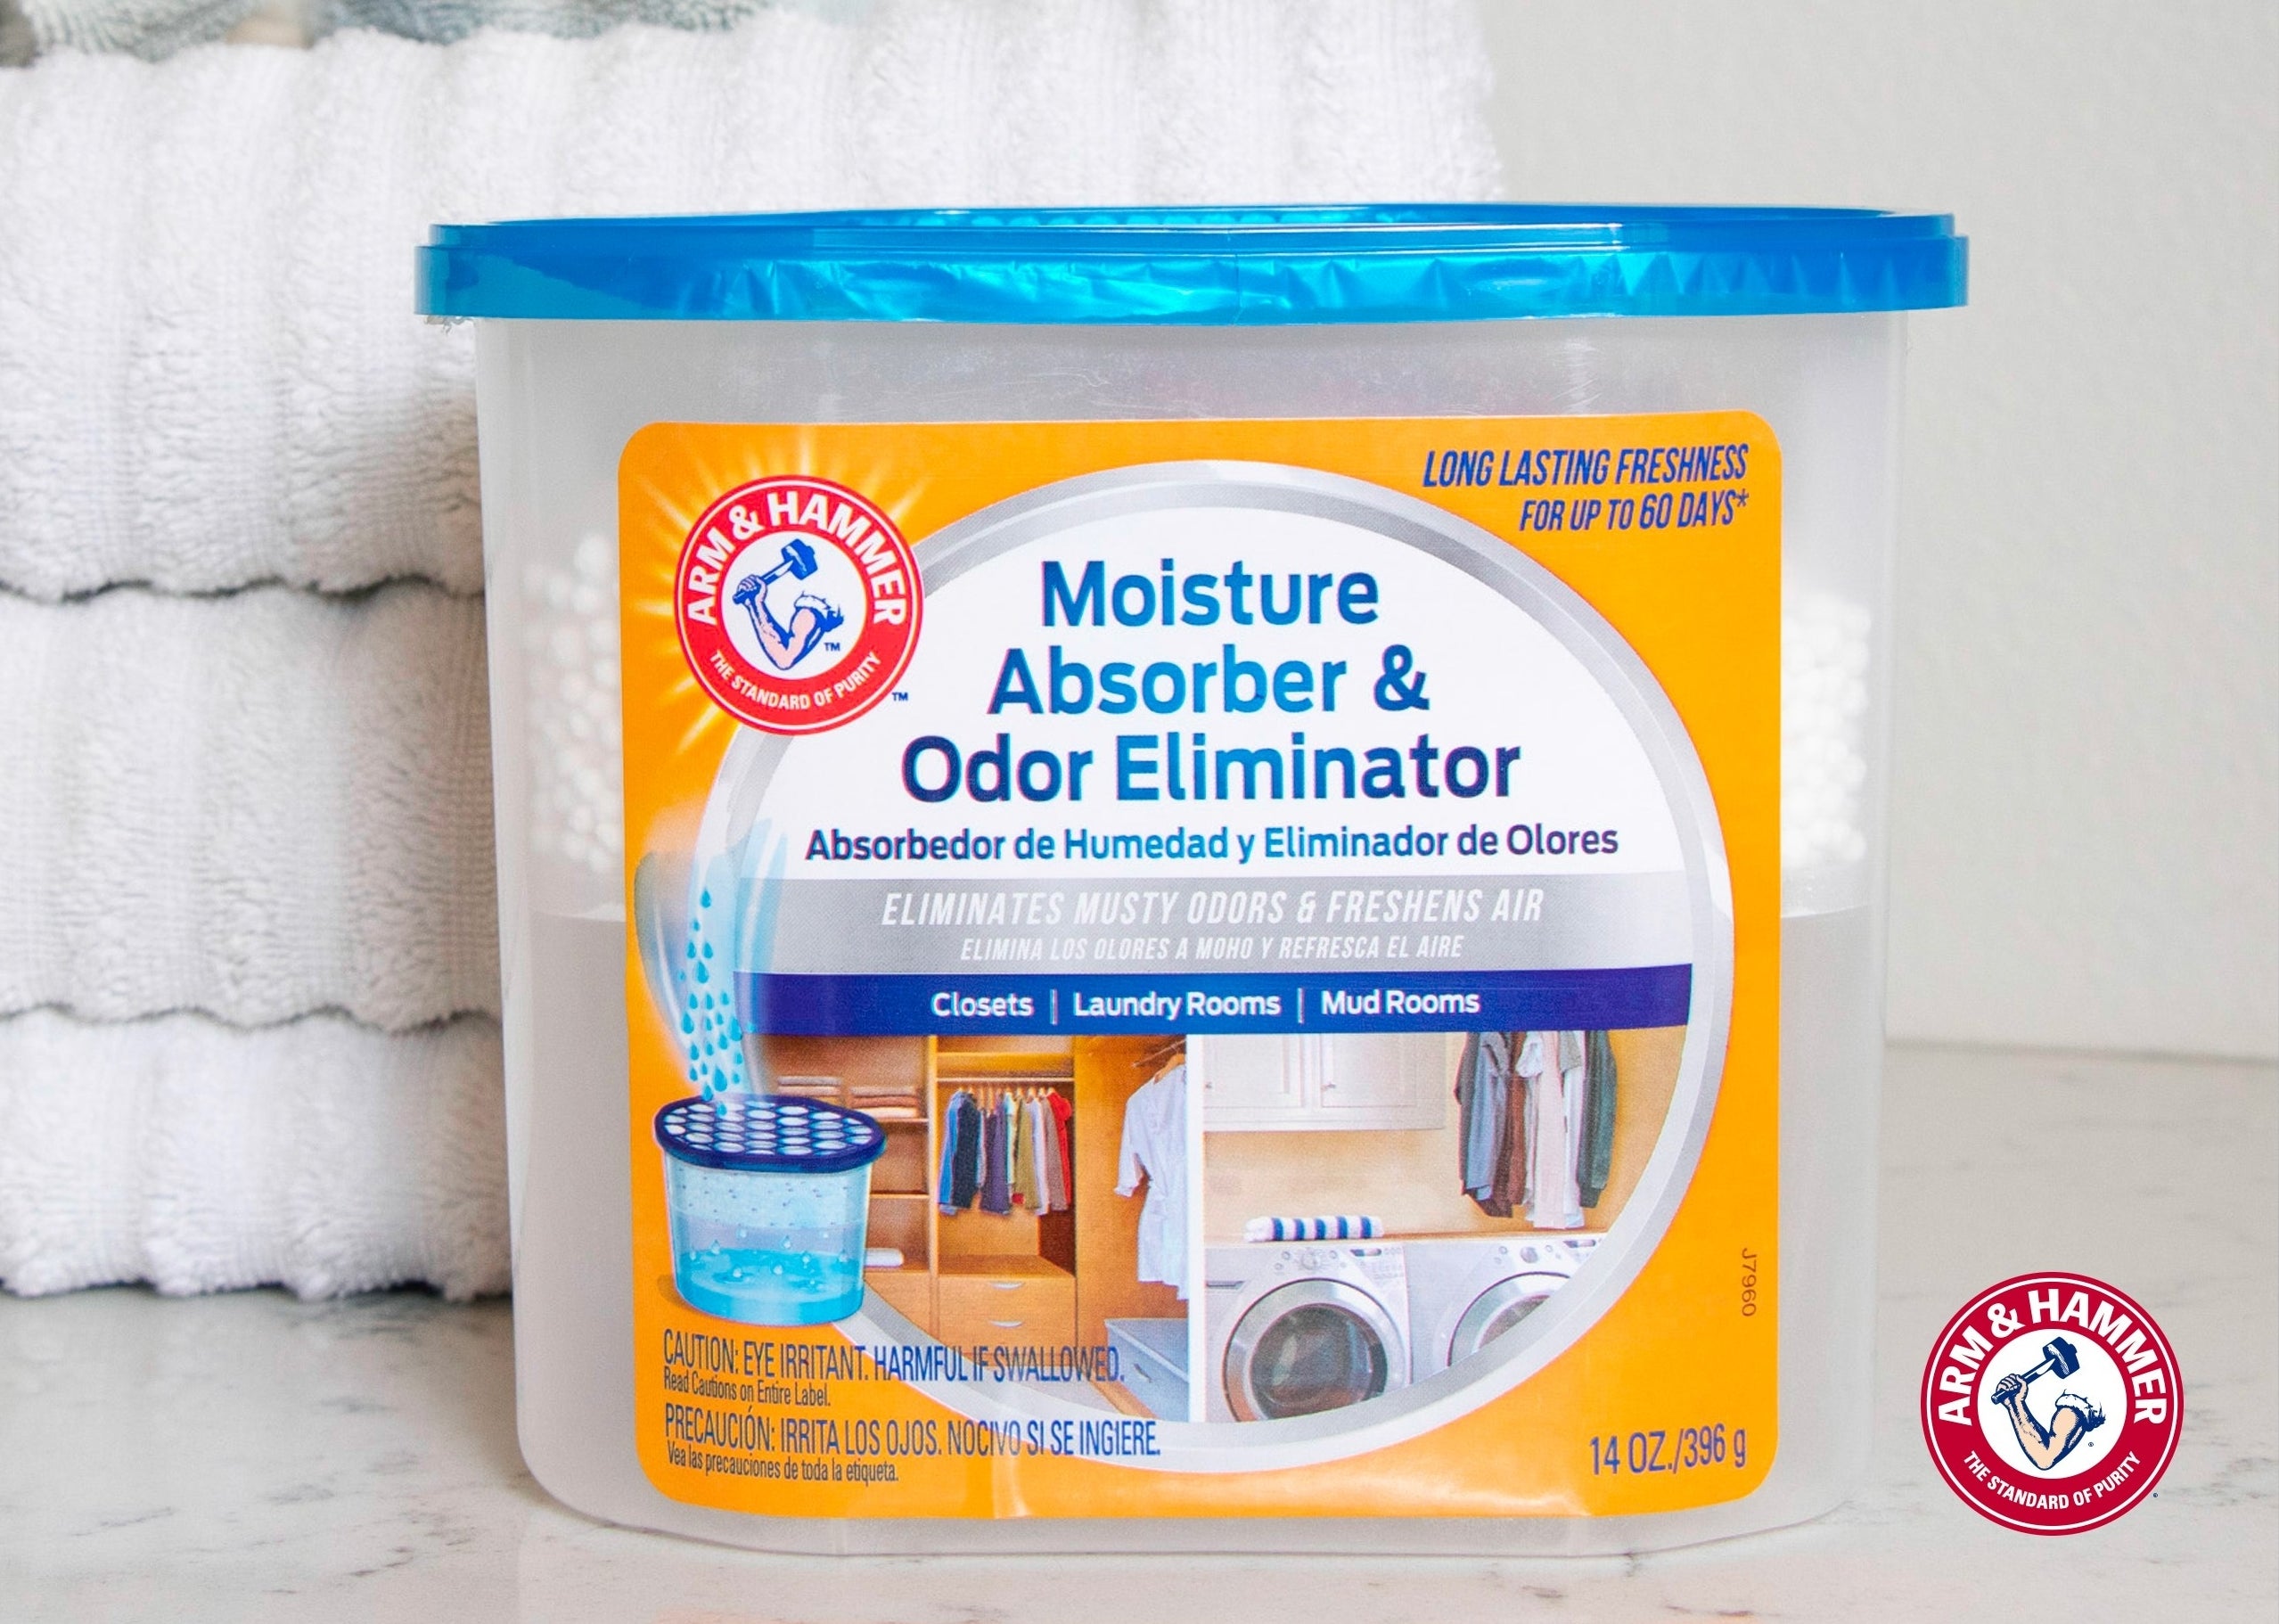 Product image of a moisture absorber and odor eliminator container for use in closets and small rooms